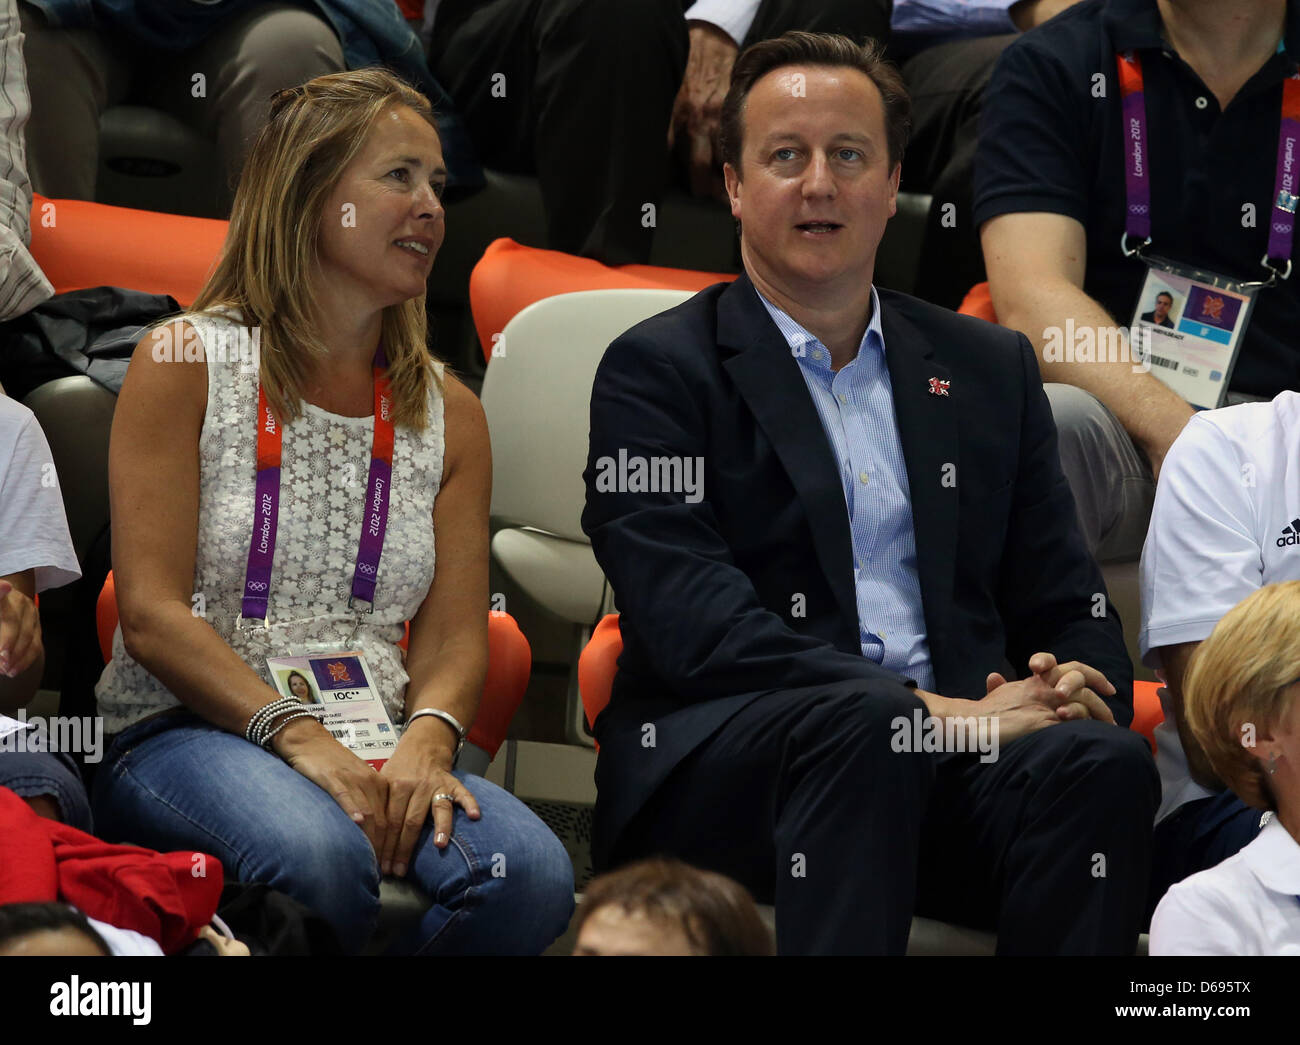 British Prime Minister, David Cameron (R) sits on the stands during the Men's Synchronised 10m Platform Final at the Diving event in Aquatics Centre at the London 2012 Olympic Games, London, Great Britain, 30 July 2012. Photo: Michael Kappeler dpa  +++(c) dpa - Bildfunk+++ Stock Photo